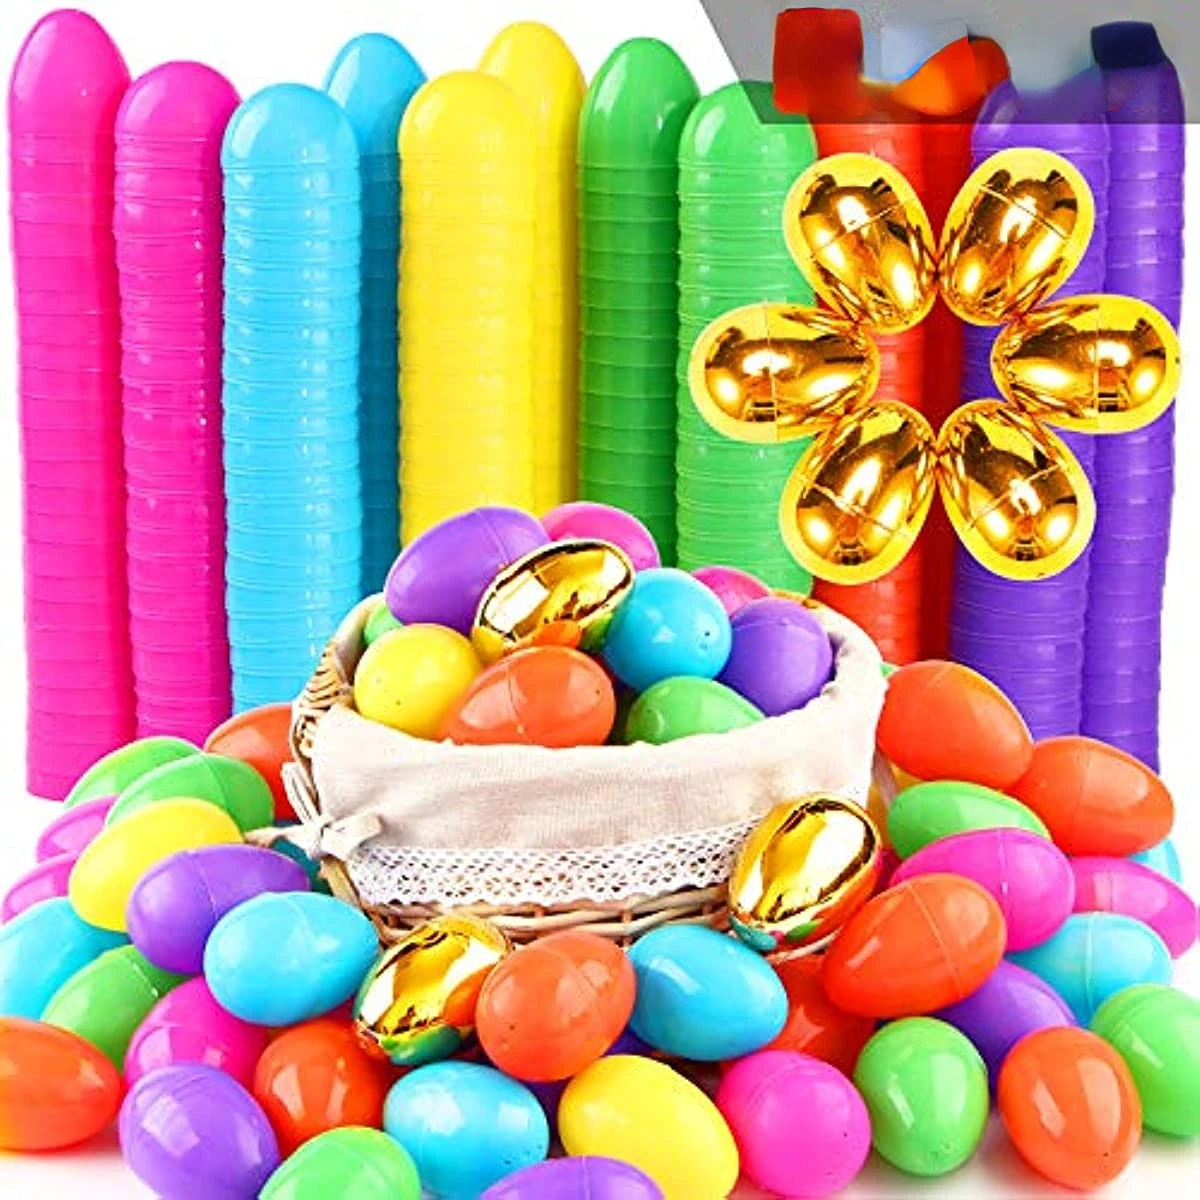 25 Pieces Easter Eggs - 3.15'' Bright Plastic Easter Eggs Include Golden Eggs for Easter Basket Stuffers Fillers Party Ballons